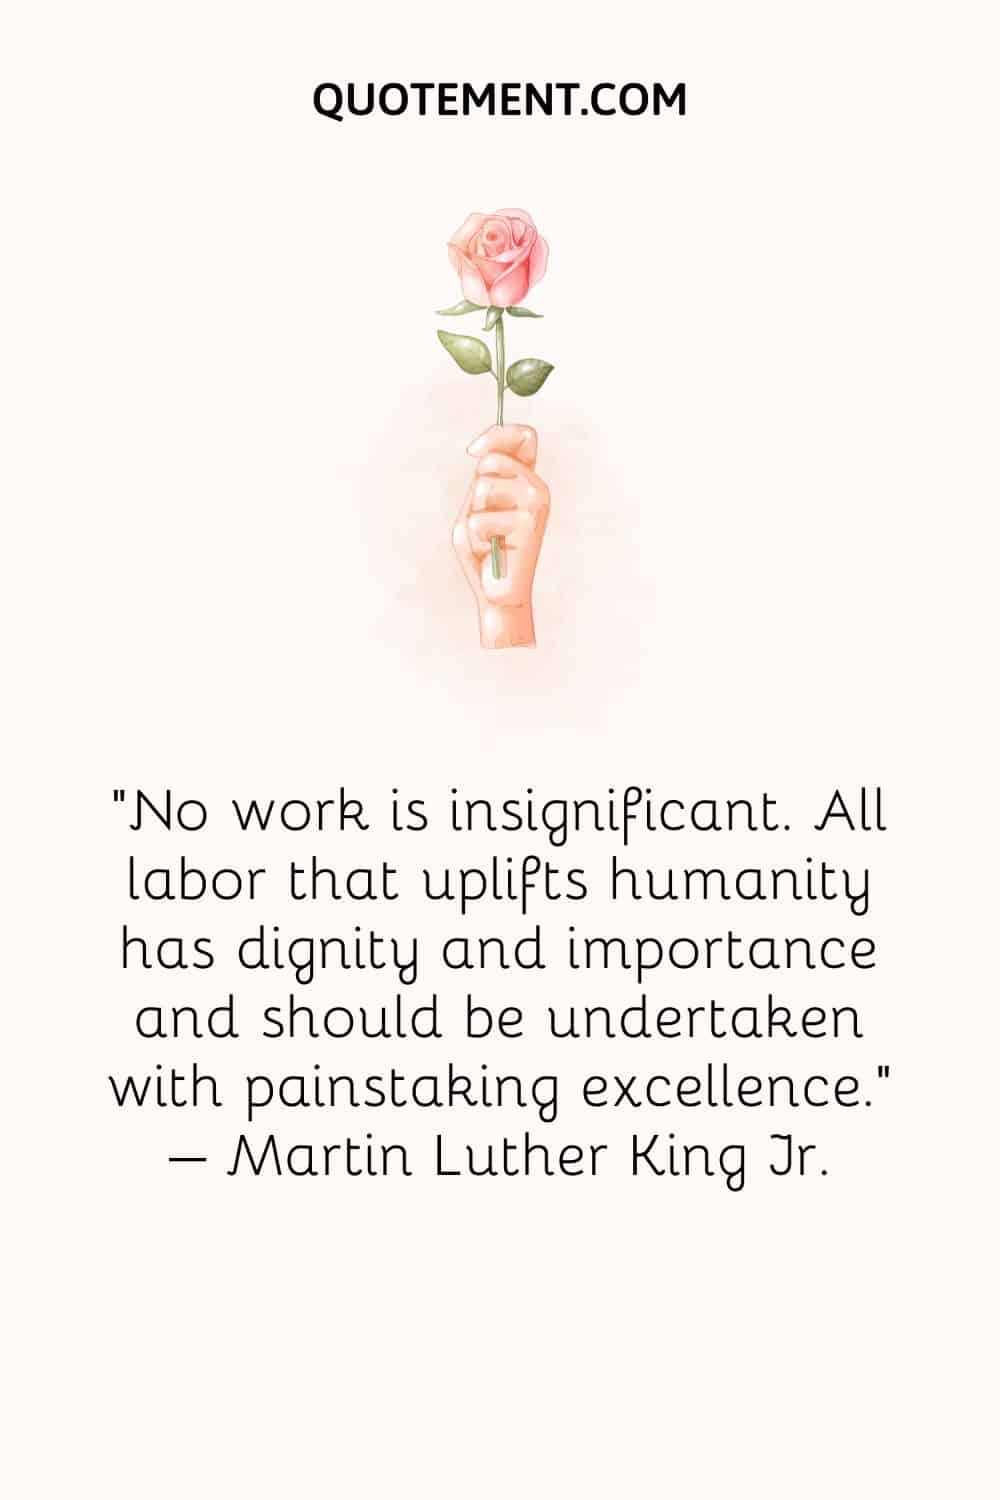 No work is insignificant. All labor that uplifts humanity has dignity and importance